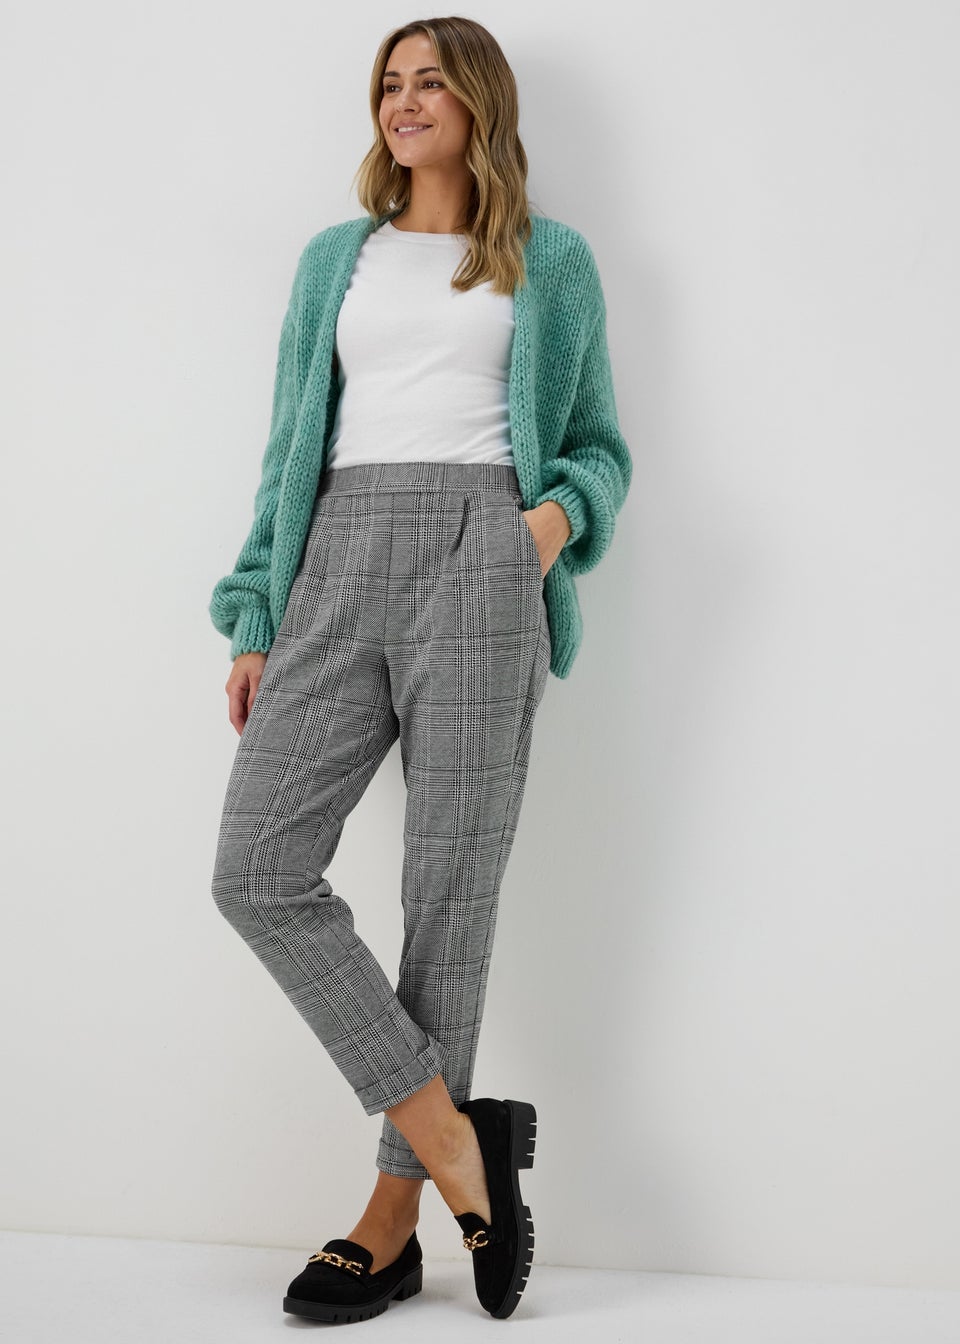 Grey Check Trousers